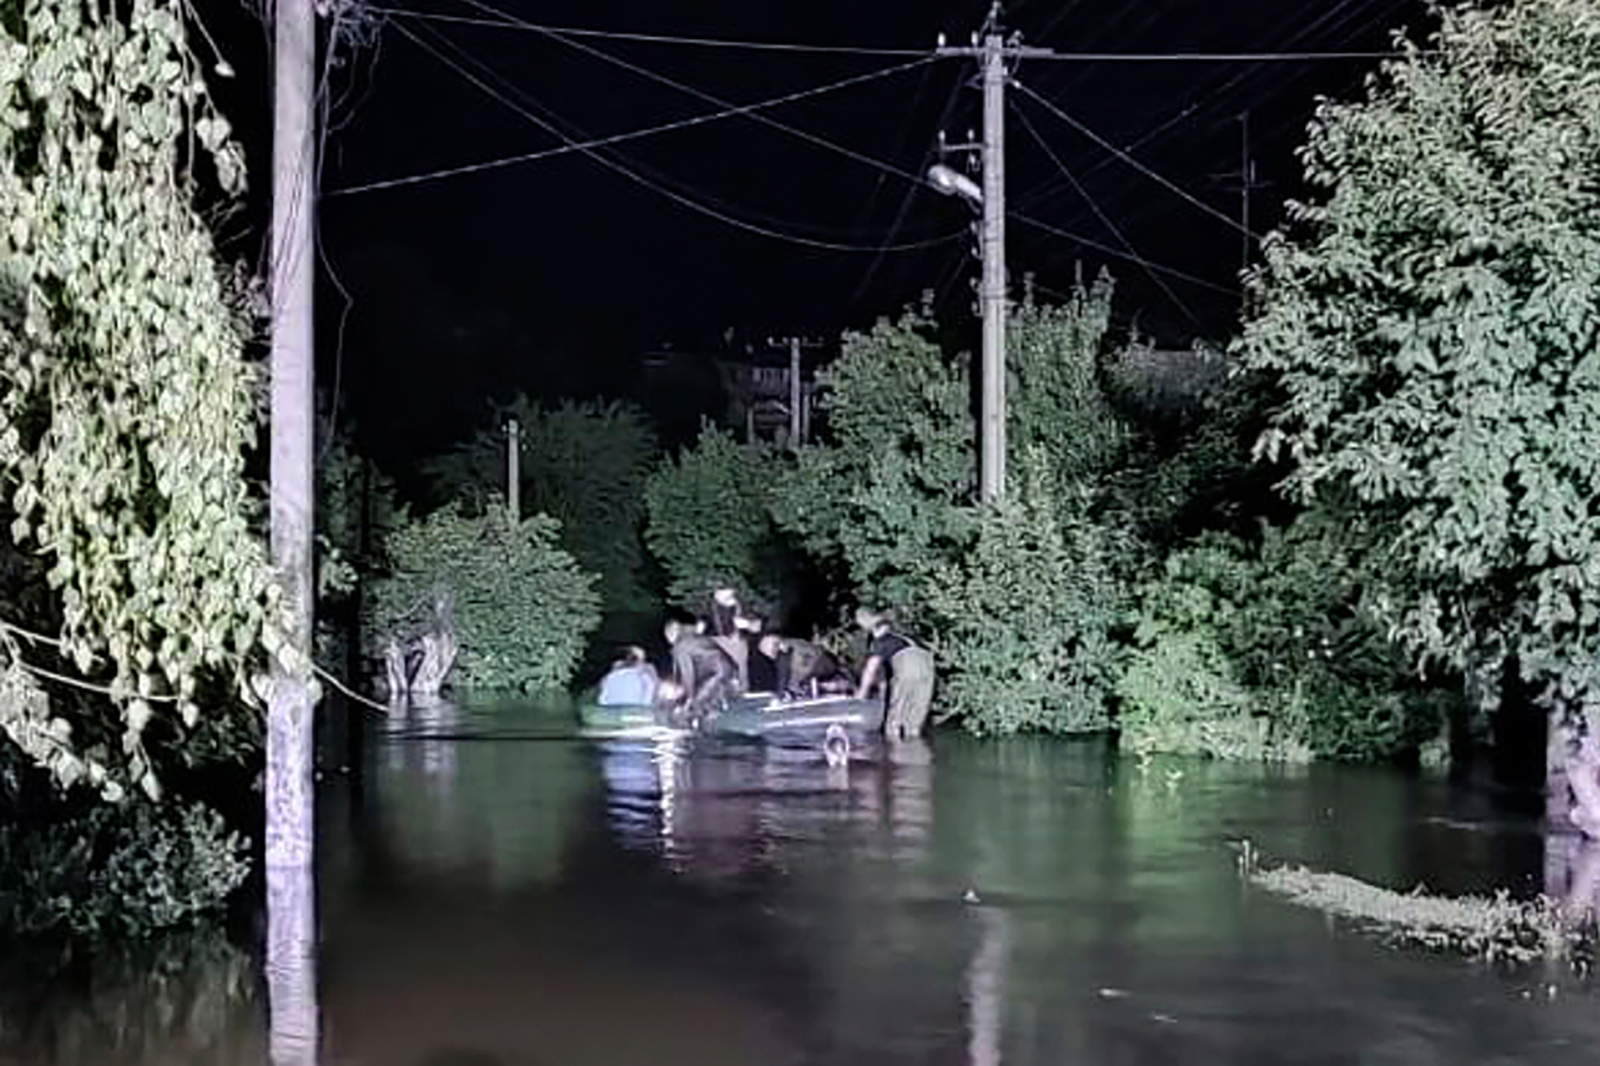 Rescuers evacuate people from a flooded area after a Russian missile hit a hydraulic structure in Kryvyi Rih on September 14.